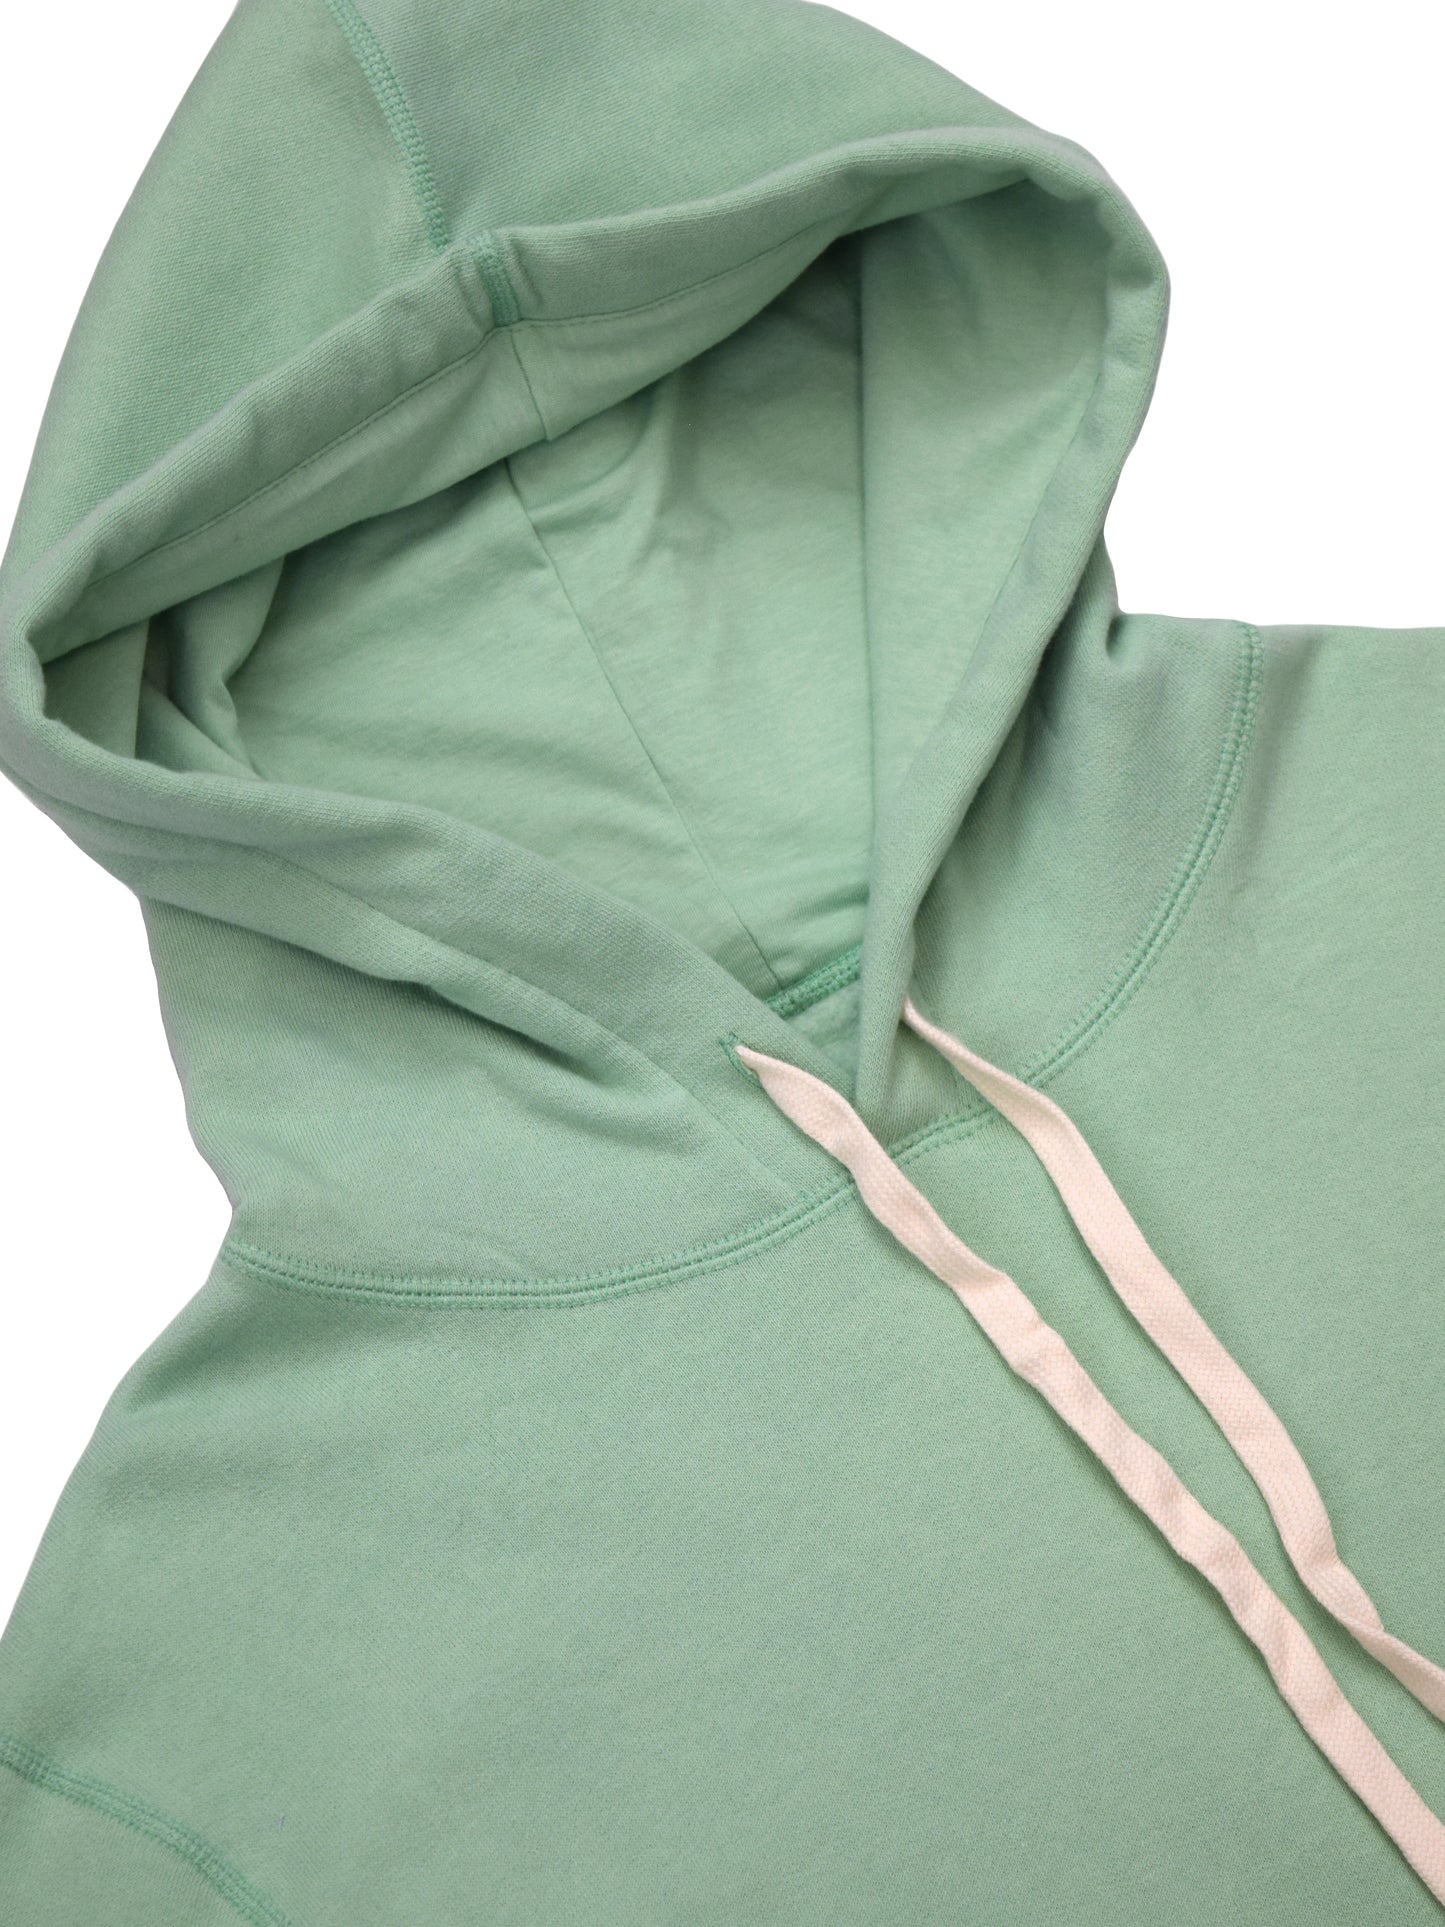 Close up of Hood Interior, White Drawstrings, Mint Green Cotton Fabric